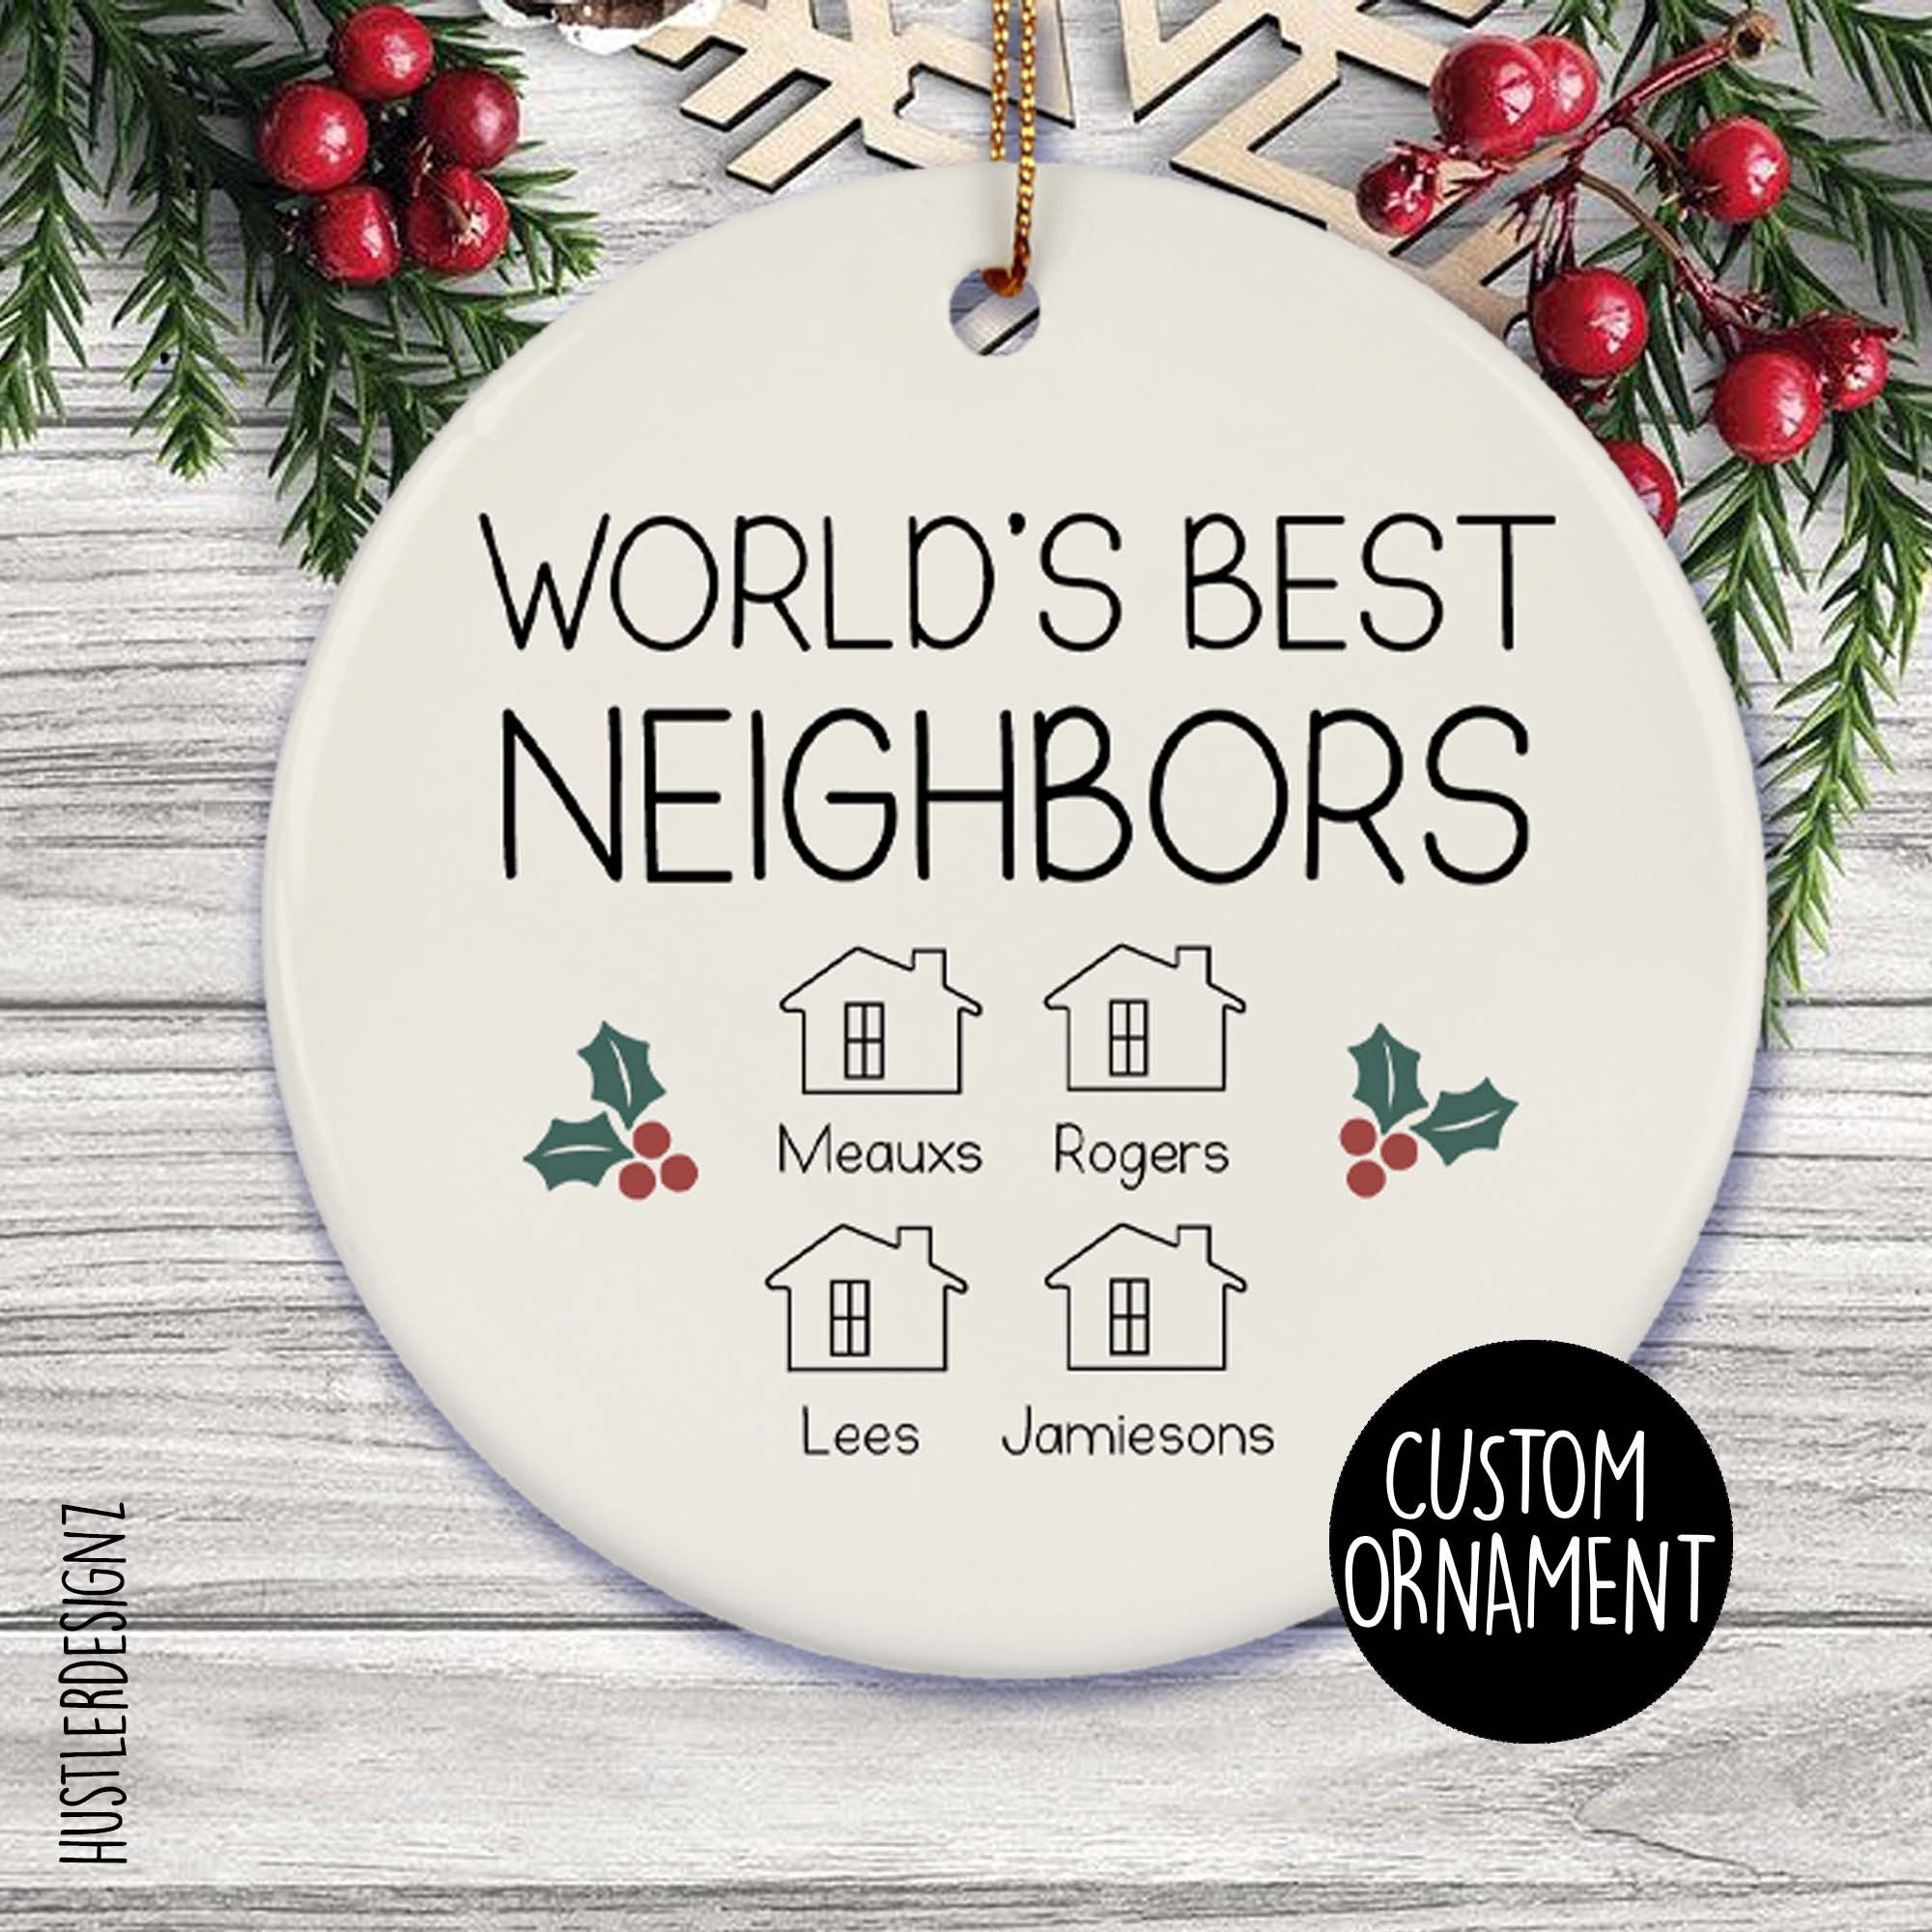 World's Best Neighbors - Neighbor Ornament - Gingerbread Houses -  personalized - C248